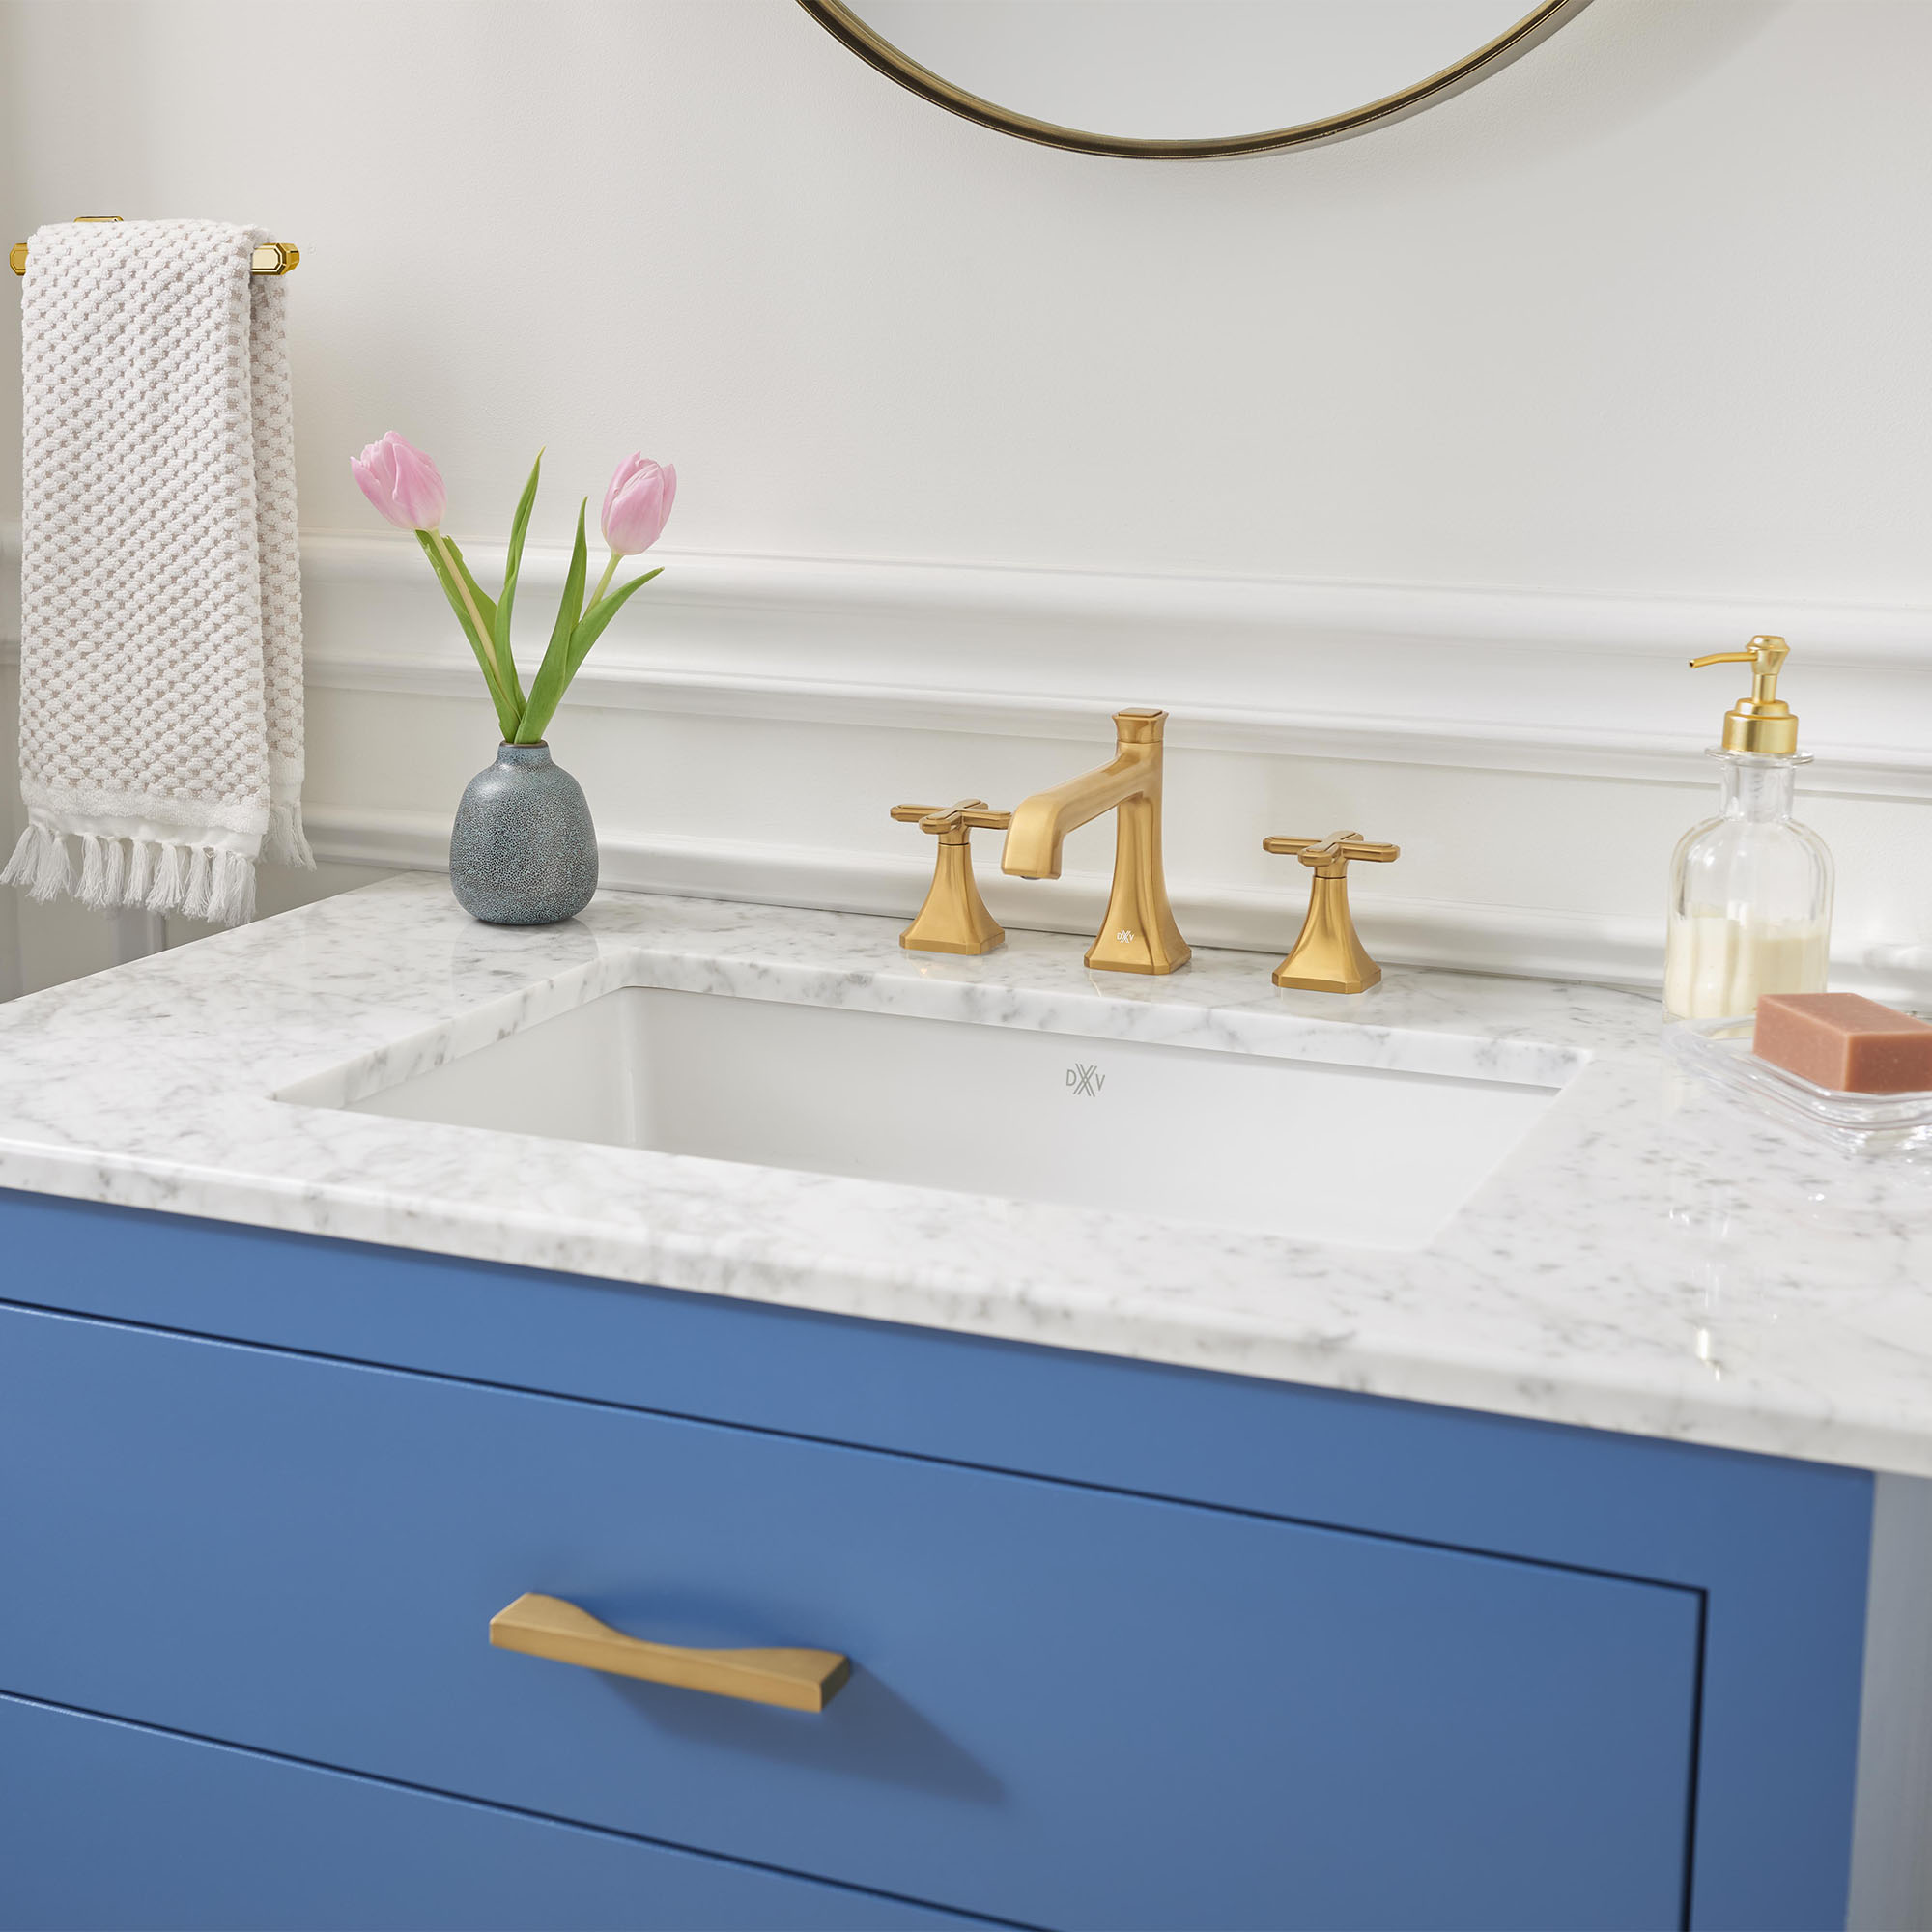 Belshire Cross Handles Only for Widespread Bathroom Faucet